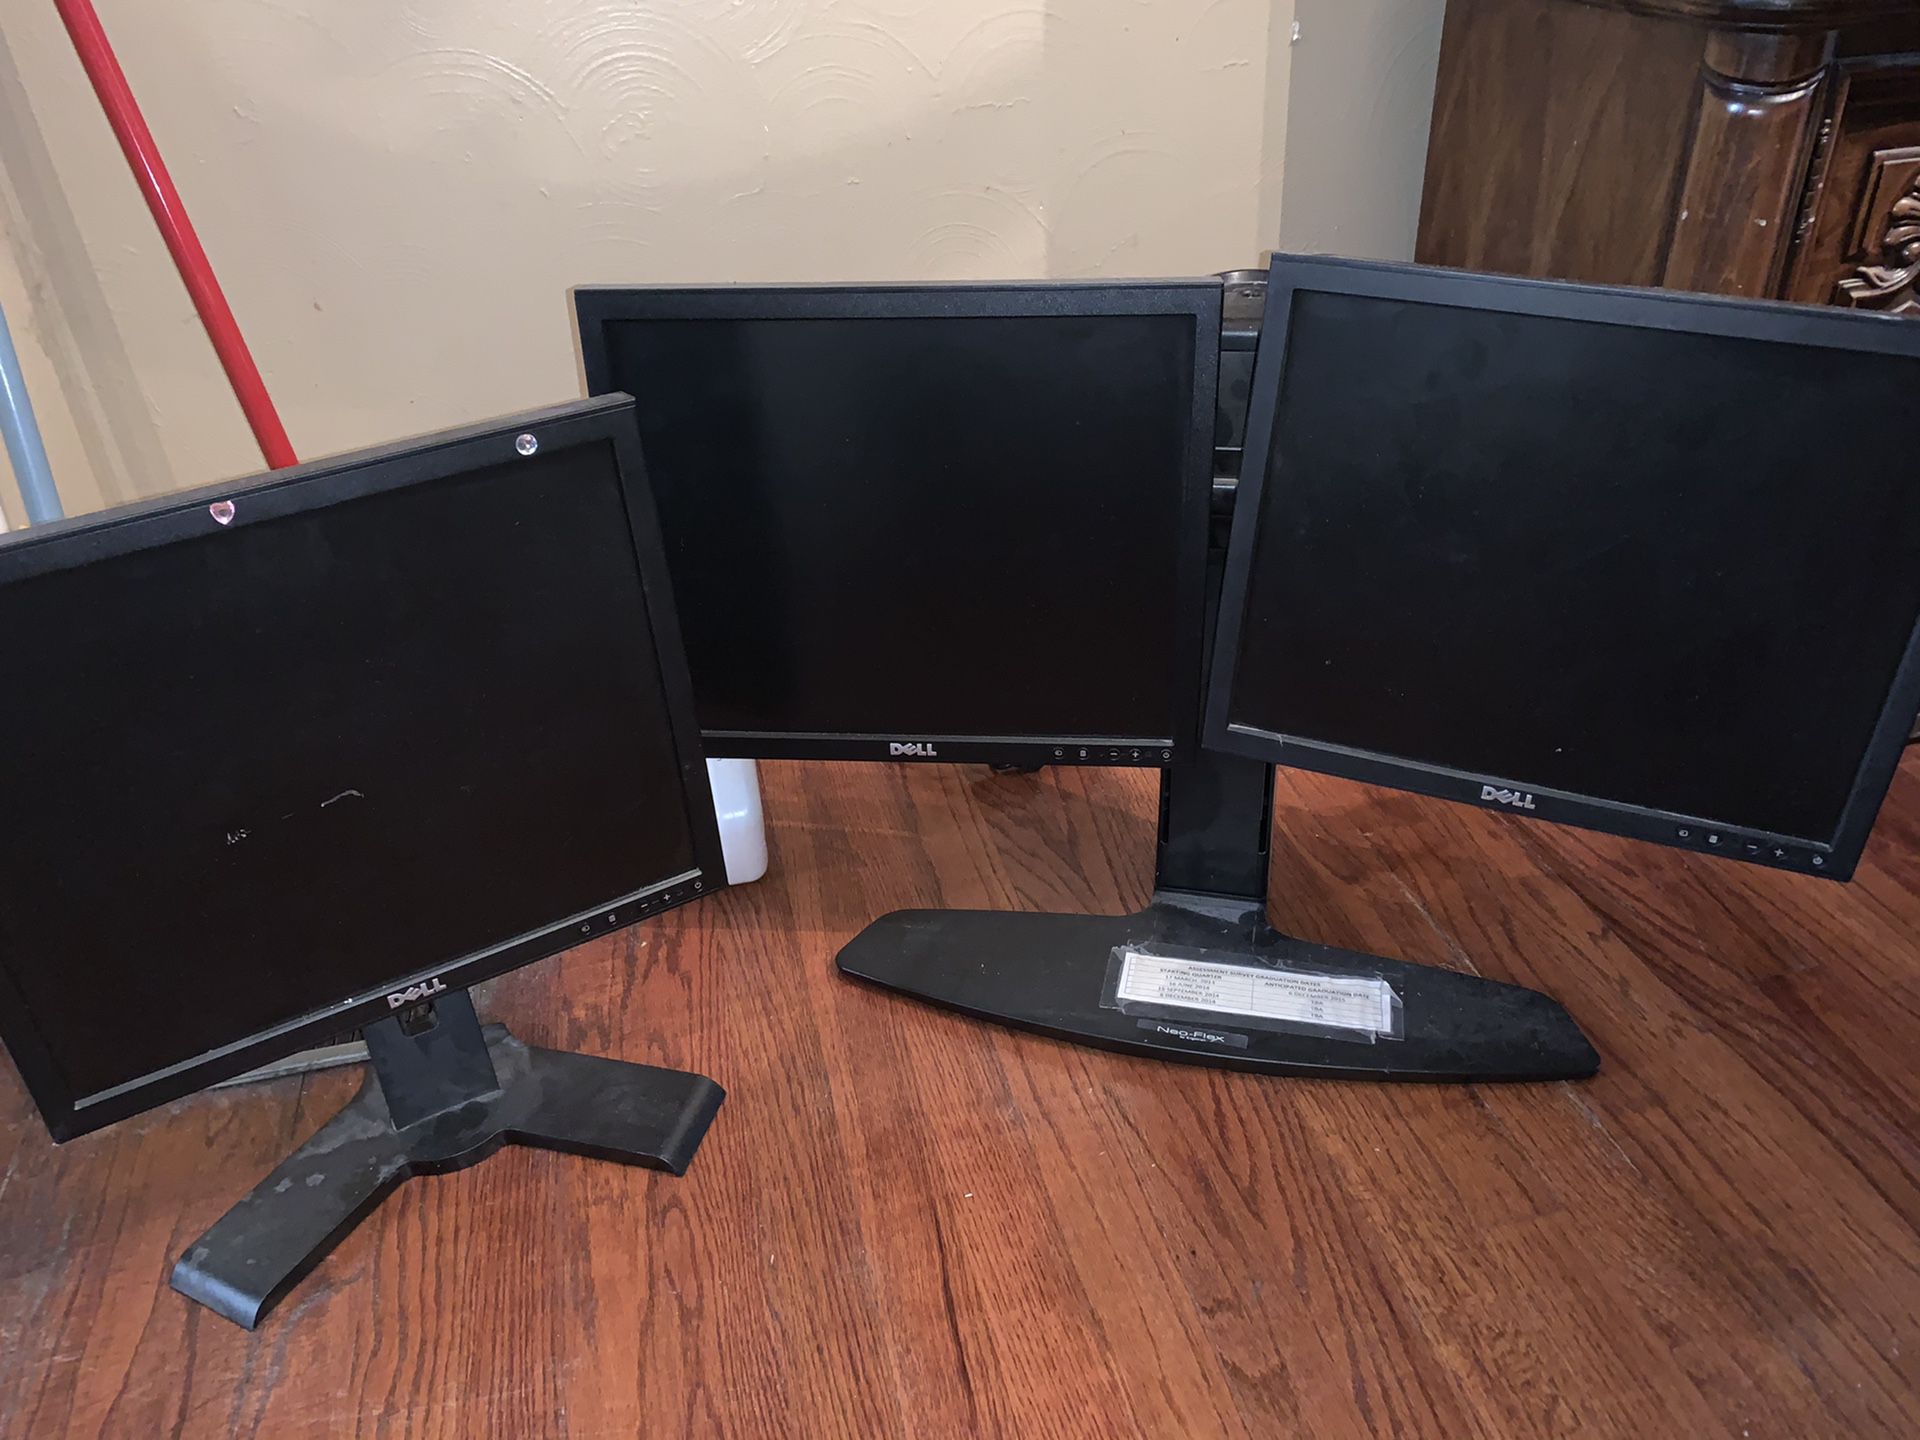 3 Old Dell computer monitors. Stands included (no hdmi)